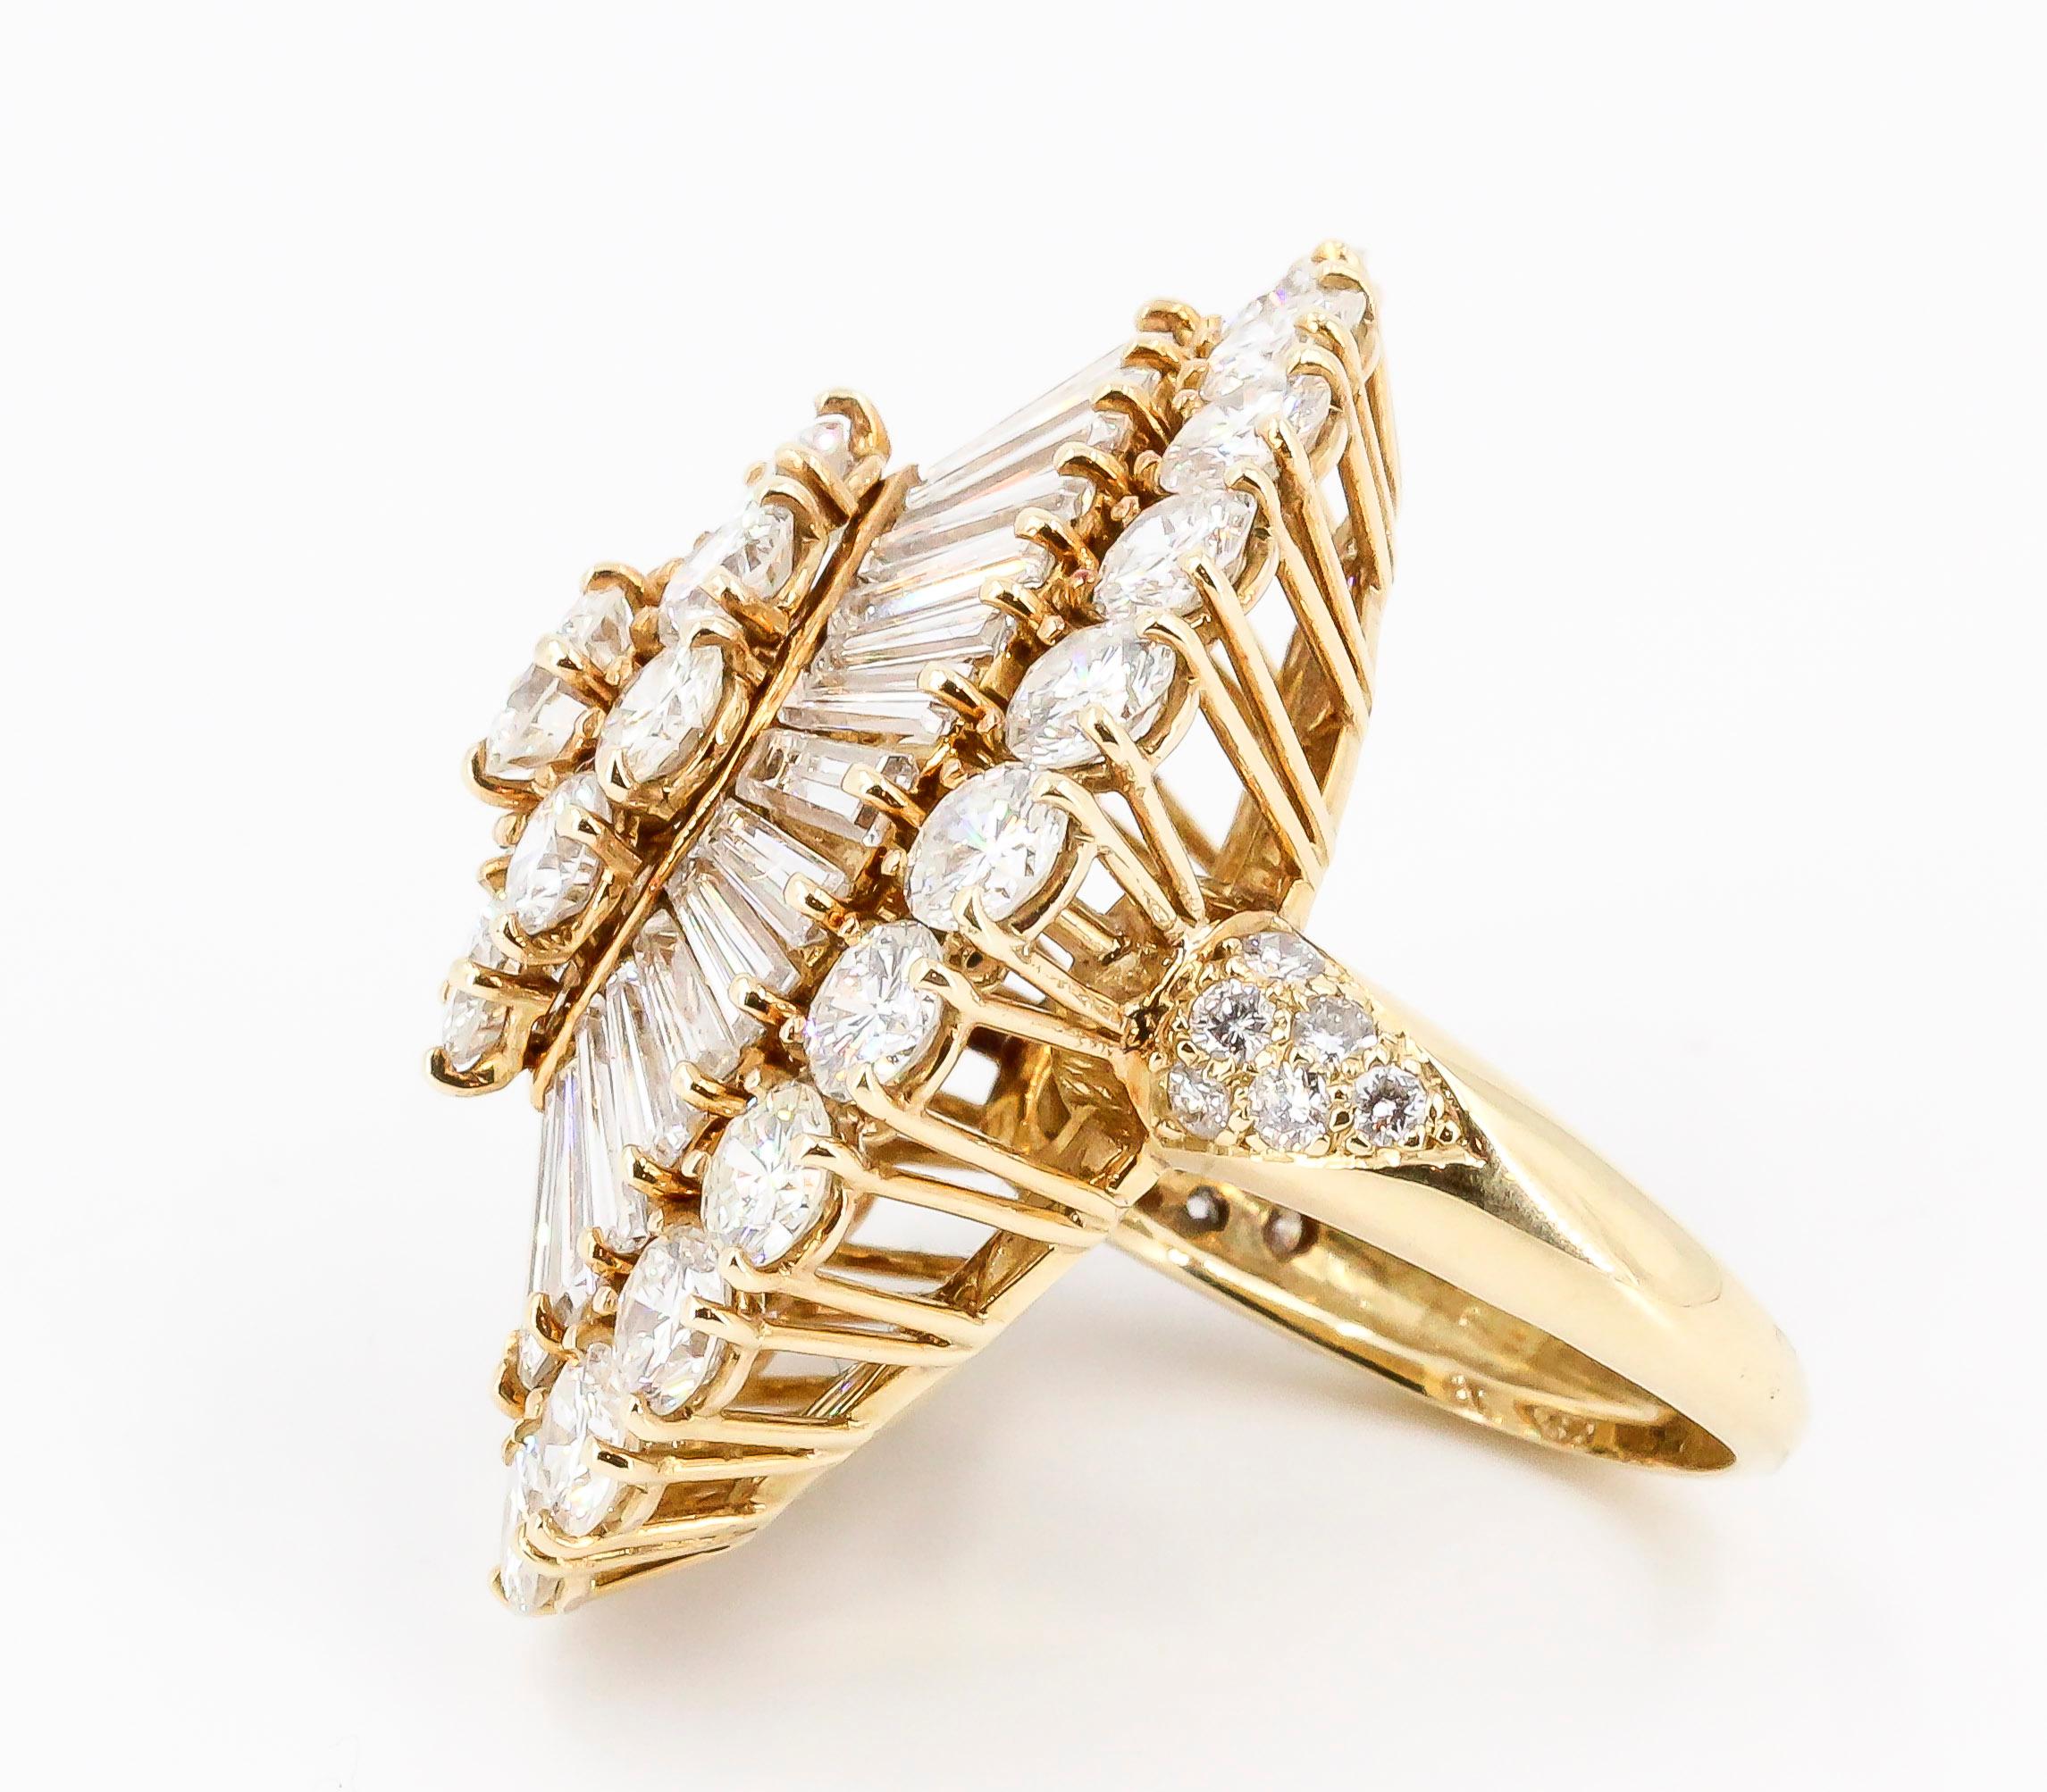 Very fine diamond and 18K yellow gold dome ring by Van Cleef & Arpels. This style of ring is commonly known as the Ballerina ring, because of its mixed cut design; it features high grade round and tapered baguette cut diamonds, approx. 10.0-11.0cts